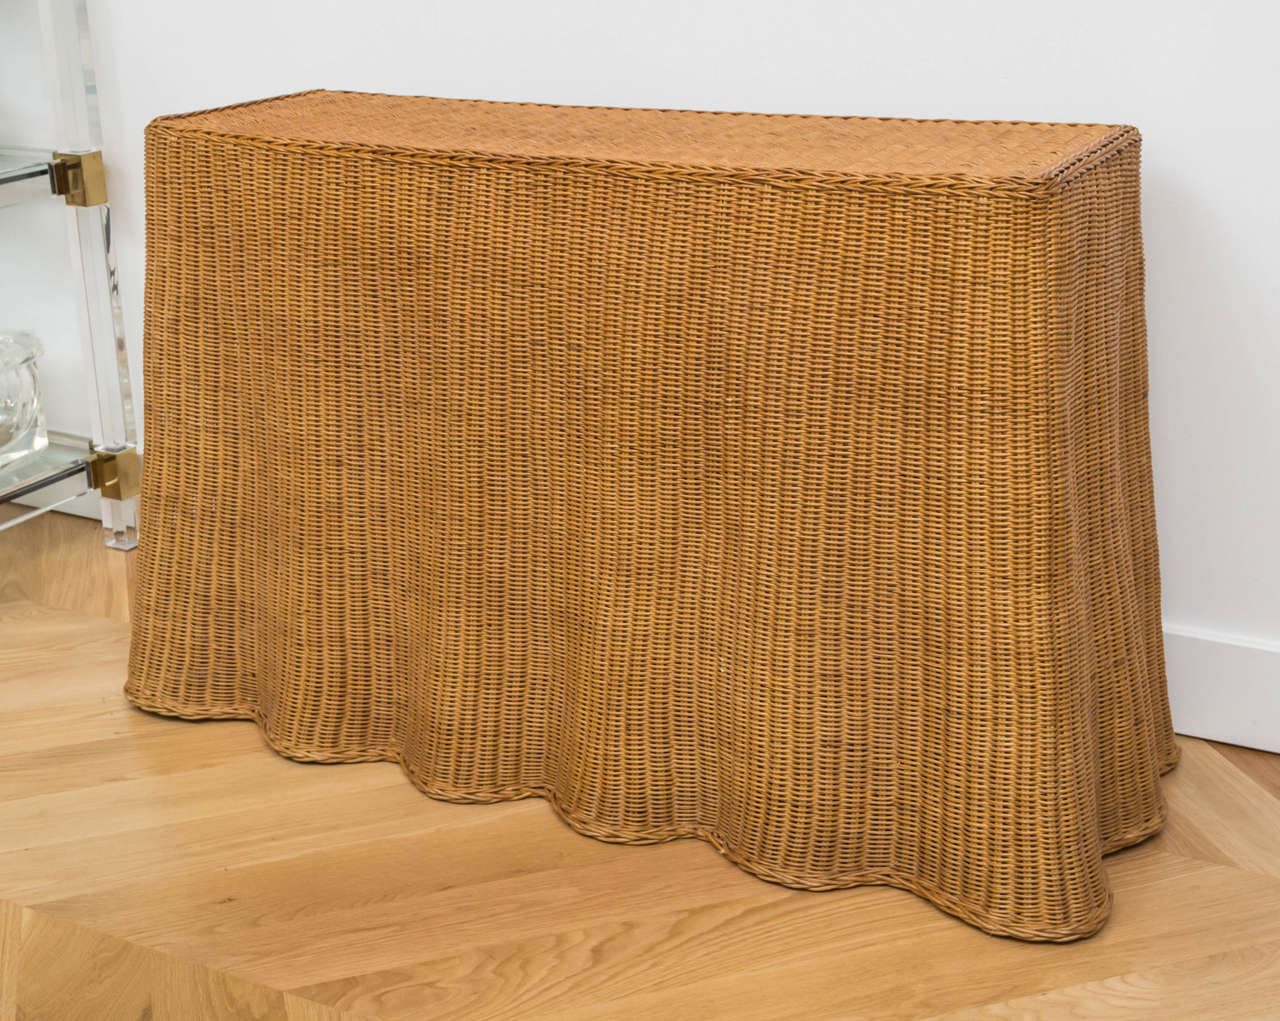 Chic wicker console with a beautiful draped effect.